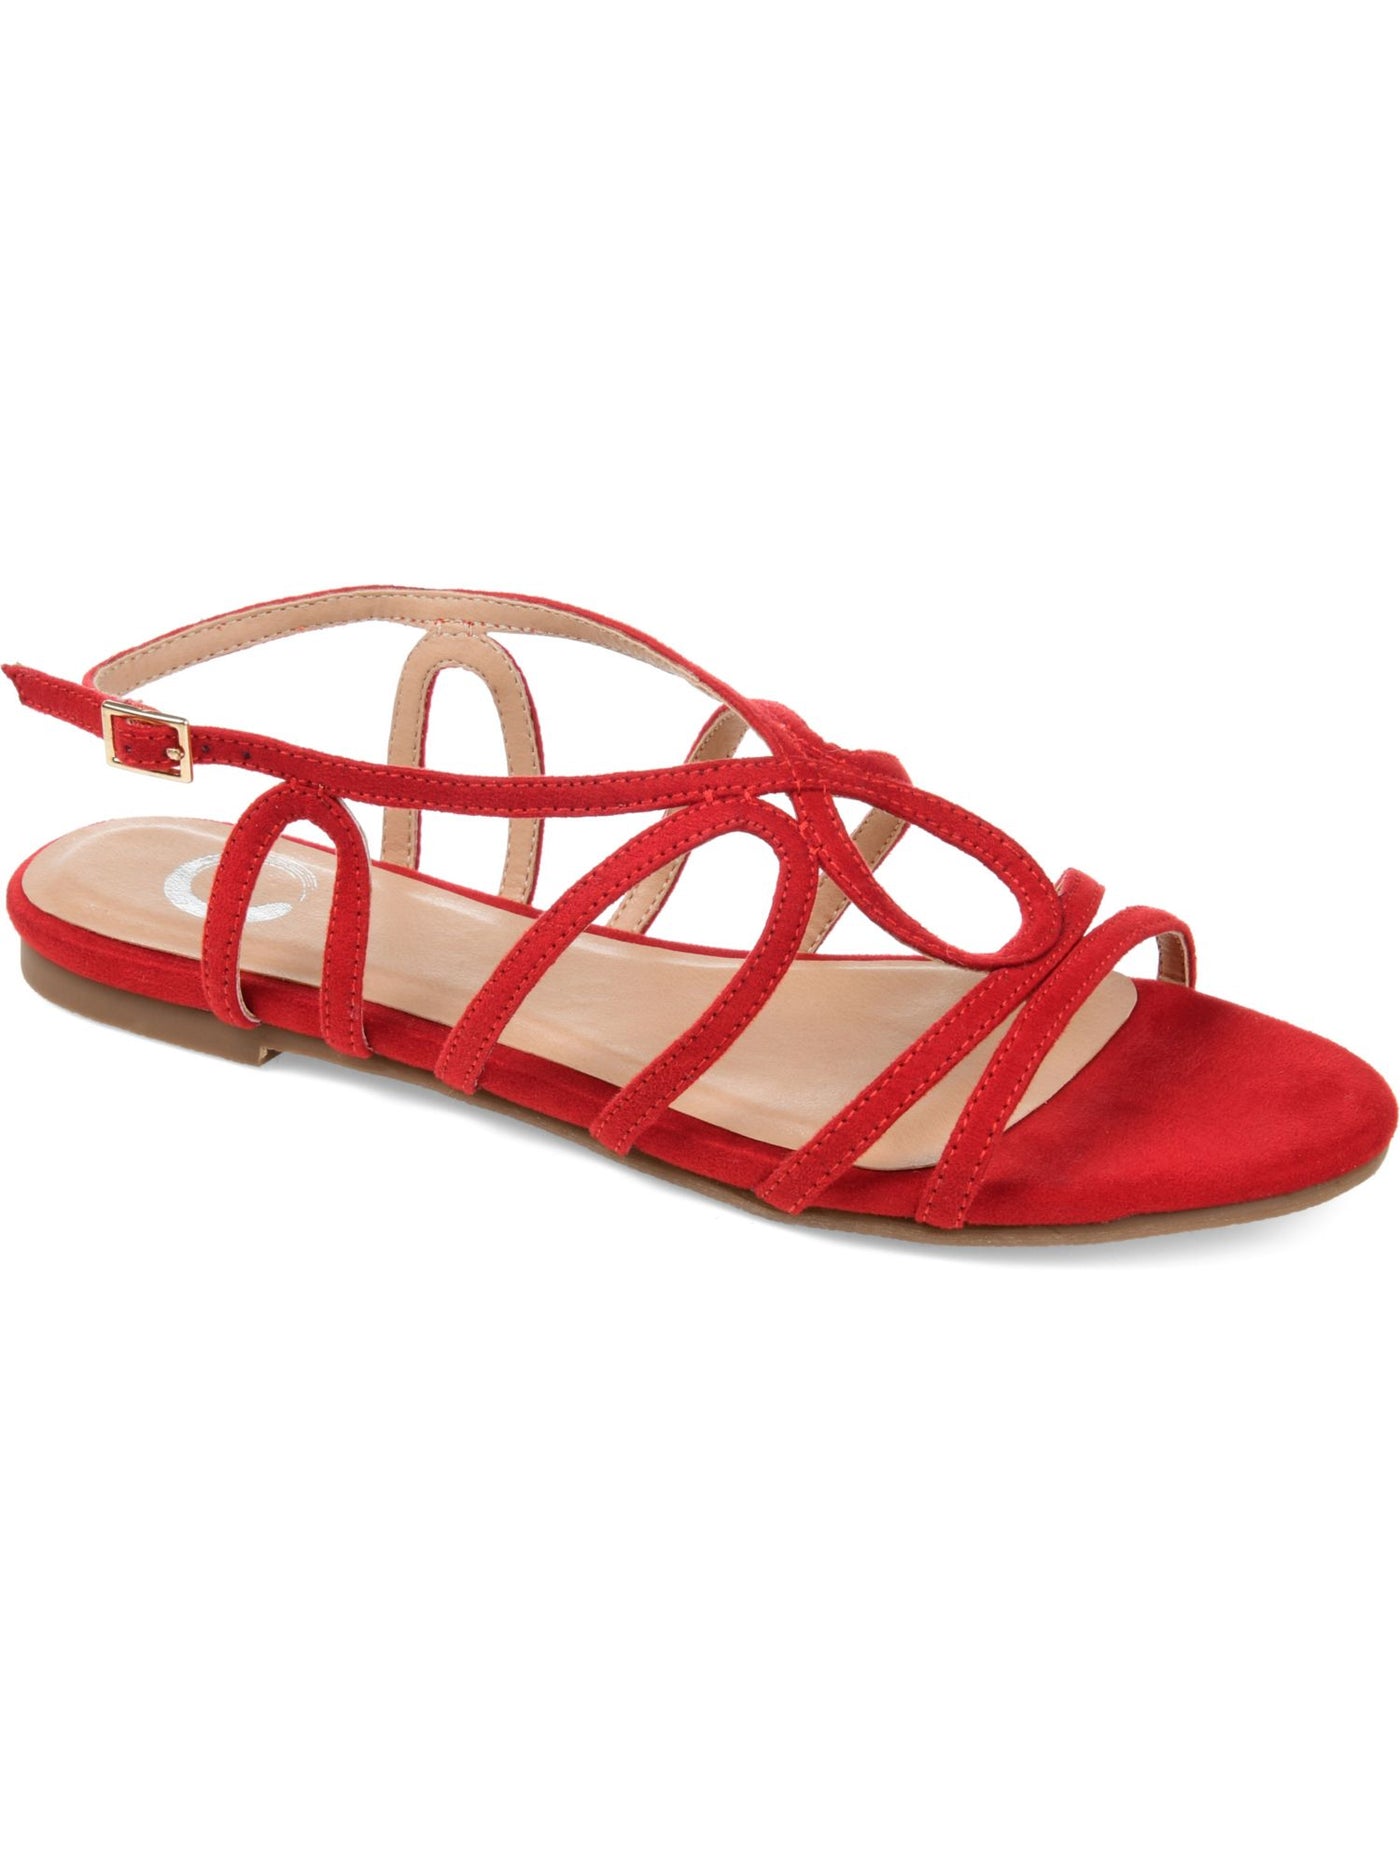 JOURNEE COLLECTION Womens Red Cushioned Strappy Honey Round Toe Buckle Sandals 6 M